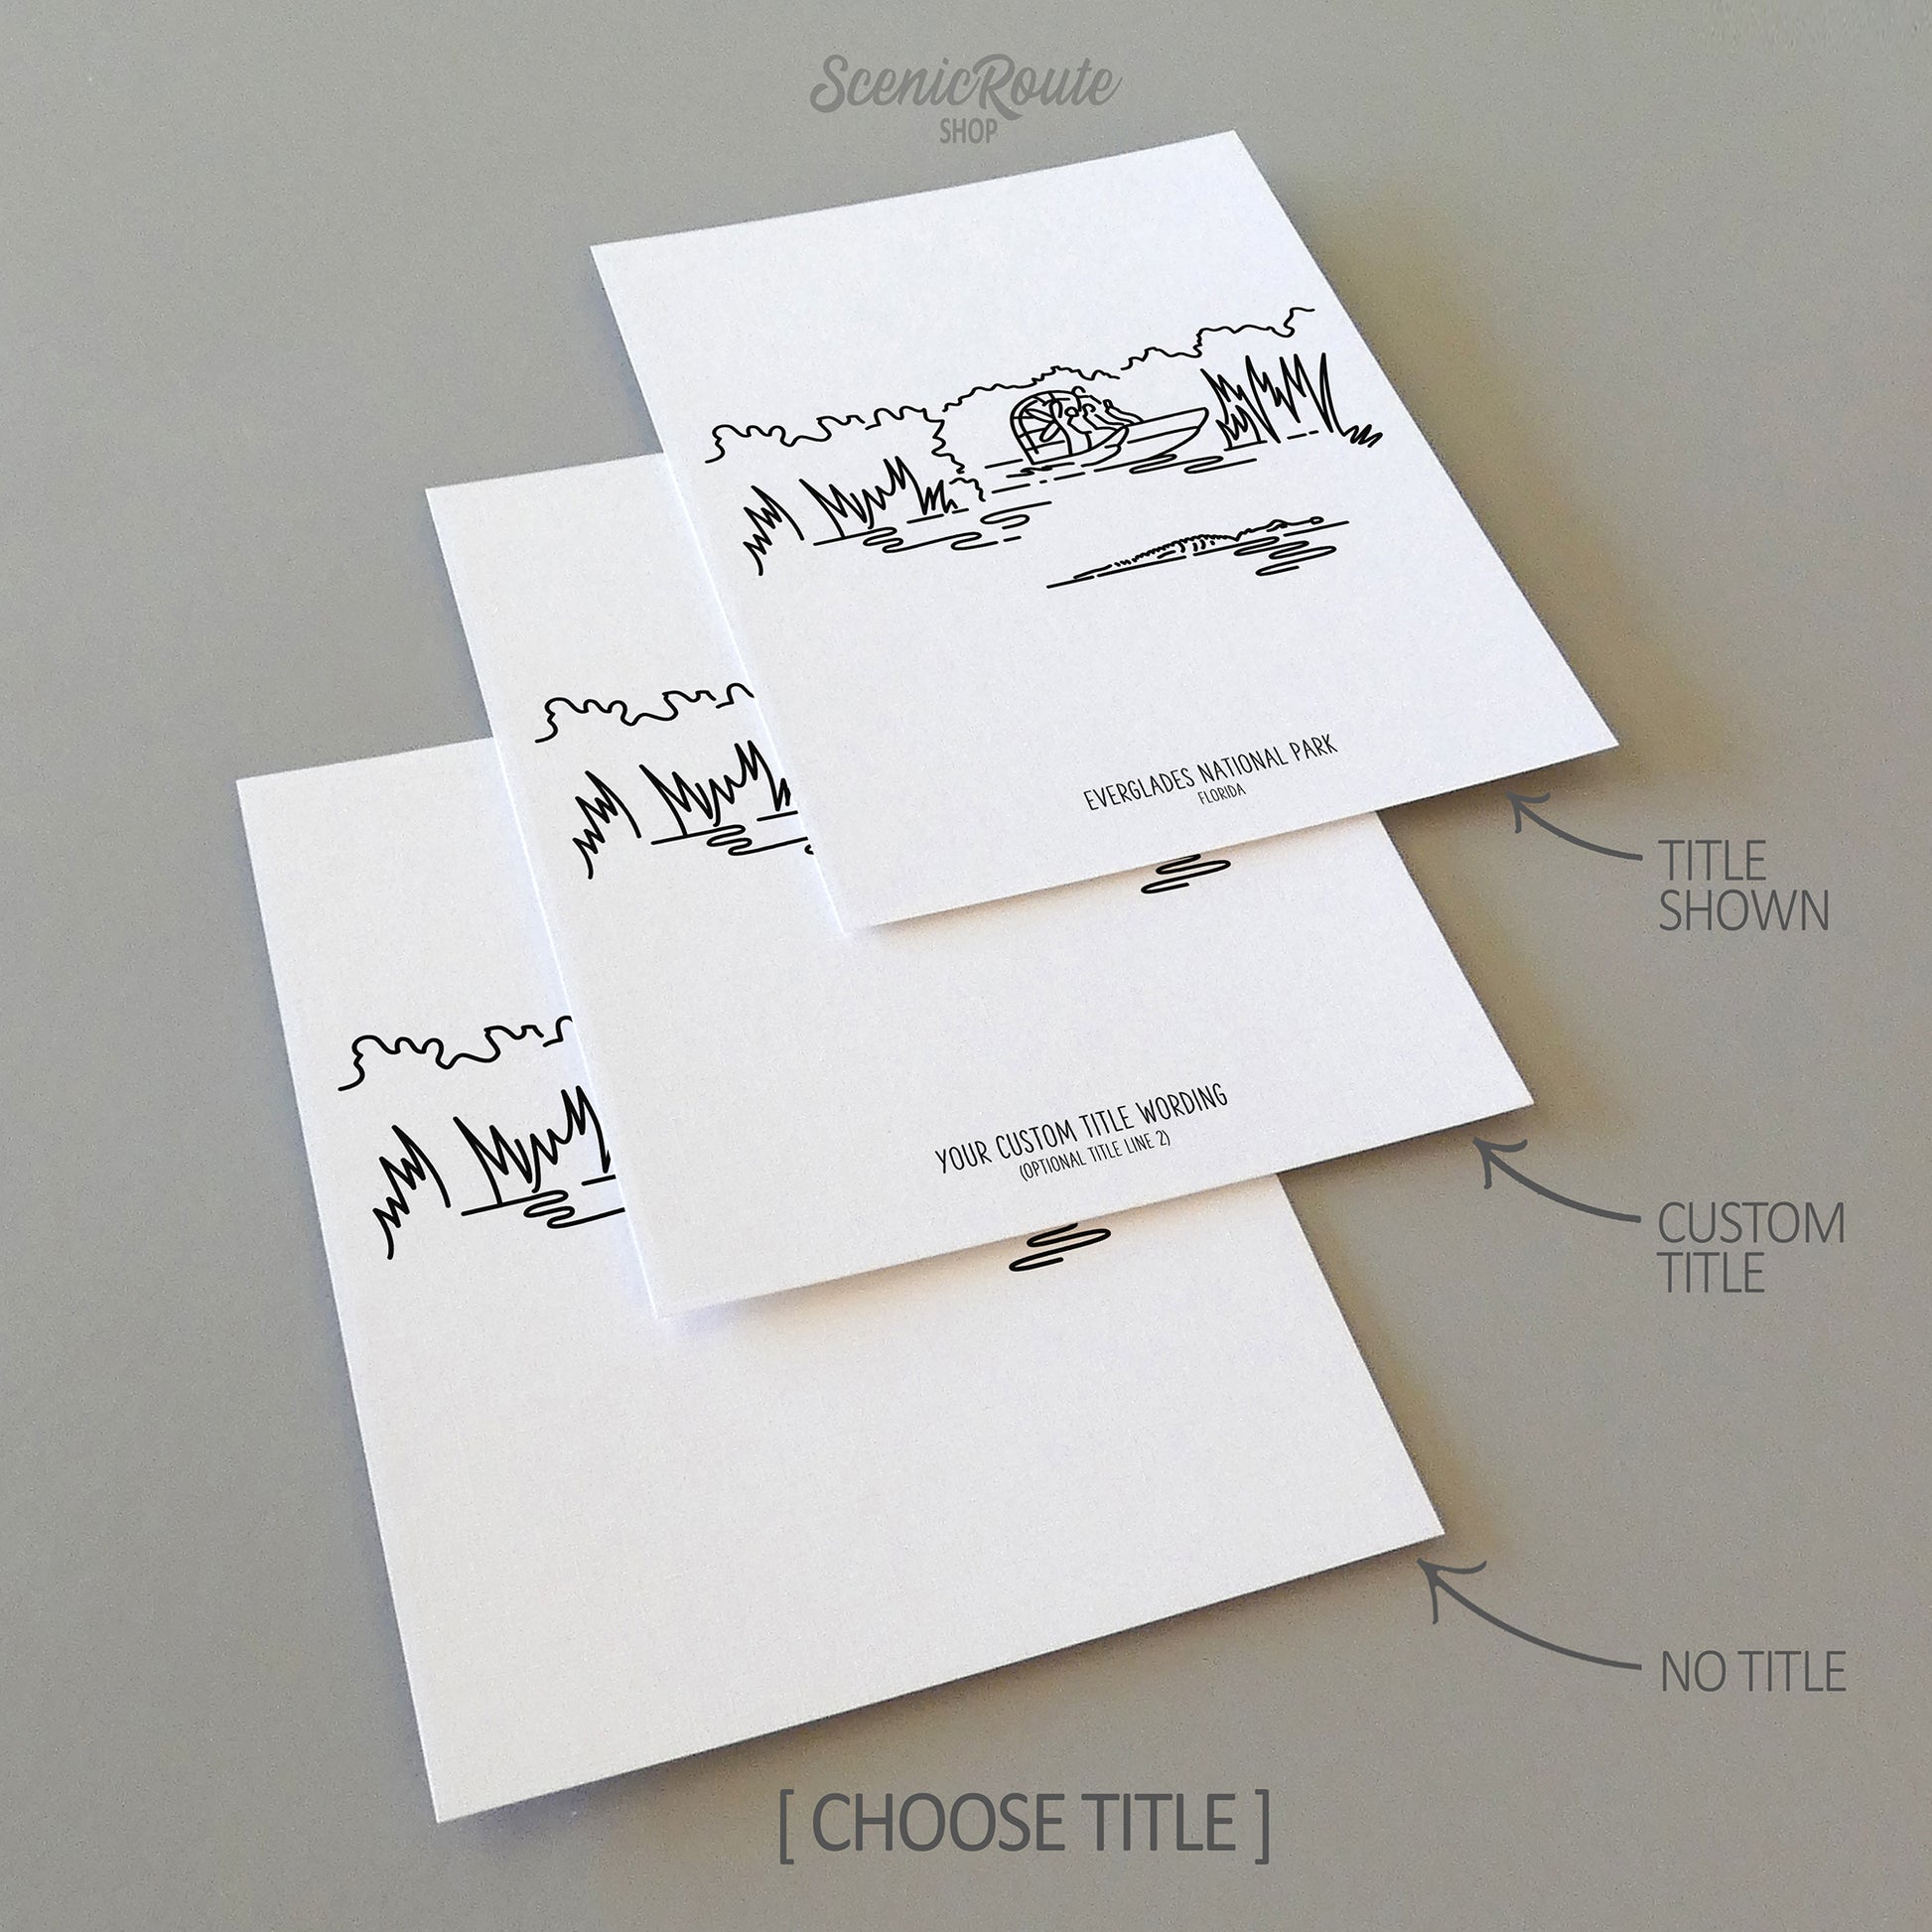 Three line art drawings of Everglades National Park on white linen paper with a gray background. The pieces are shown with title options that can be chosen and personalized.